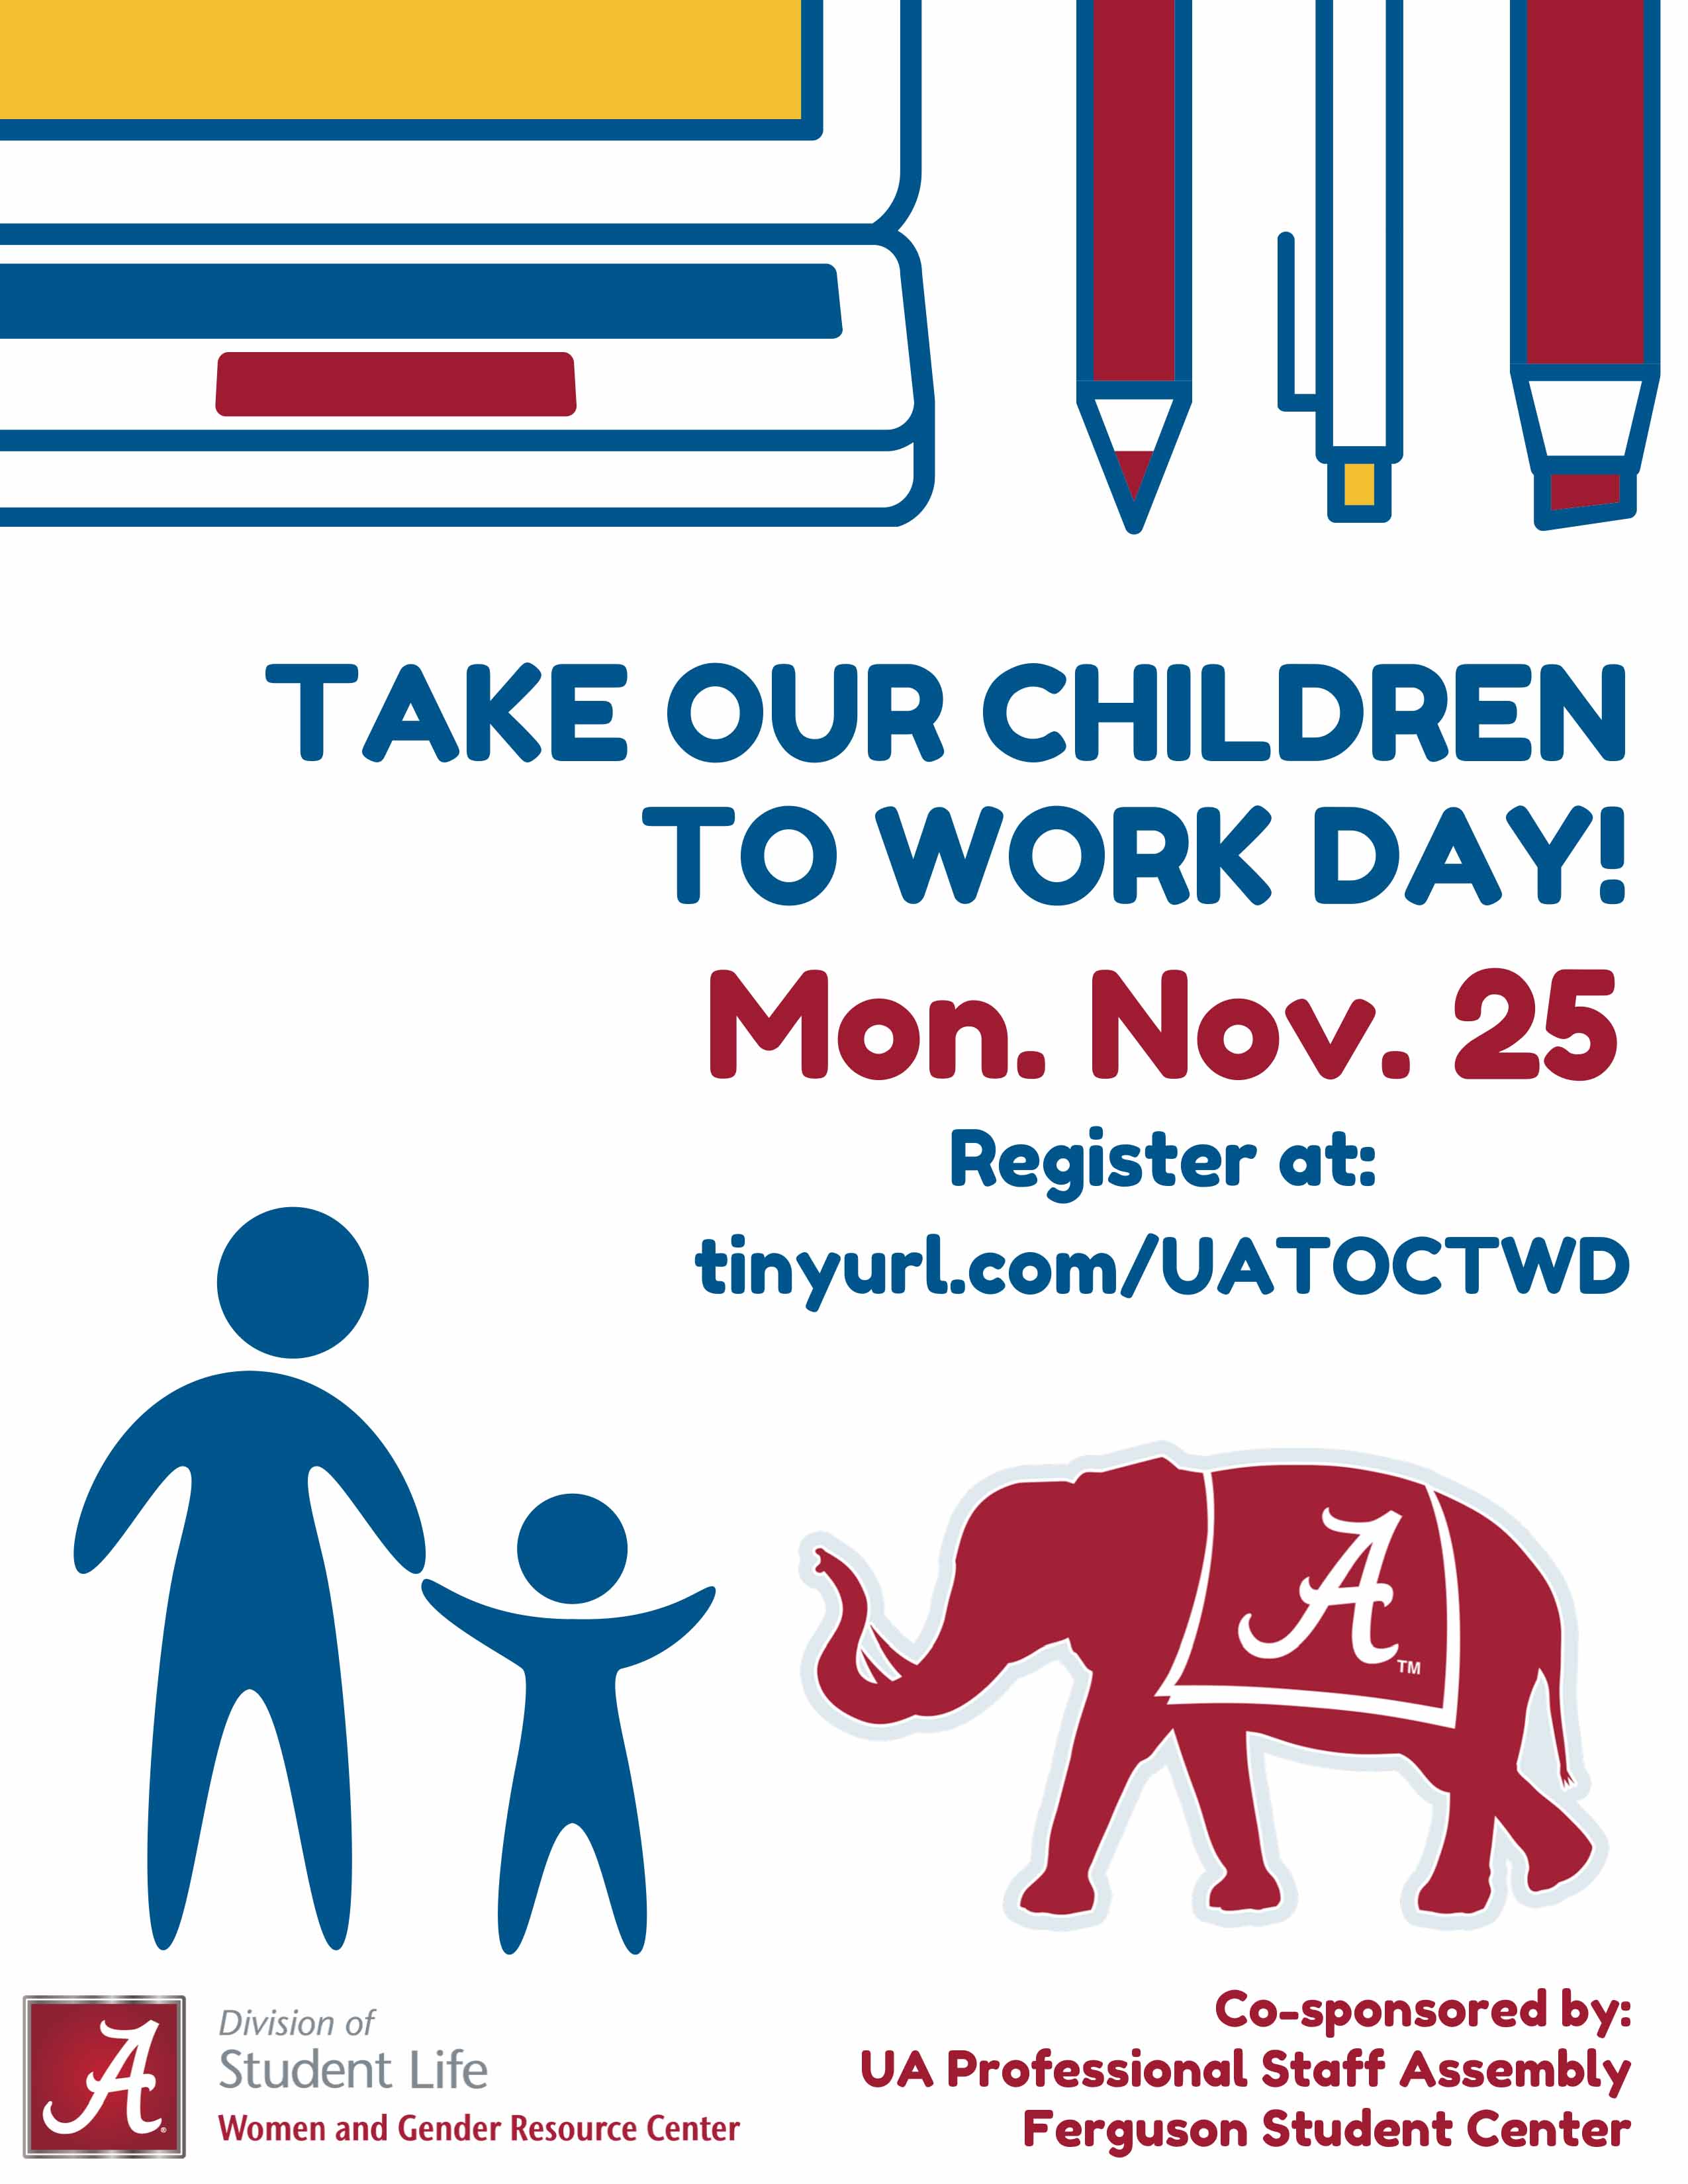 Bring Your Child To Work Day Clipart